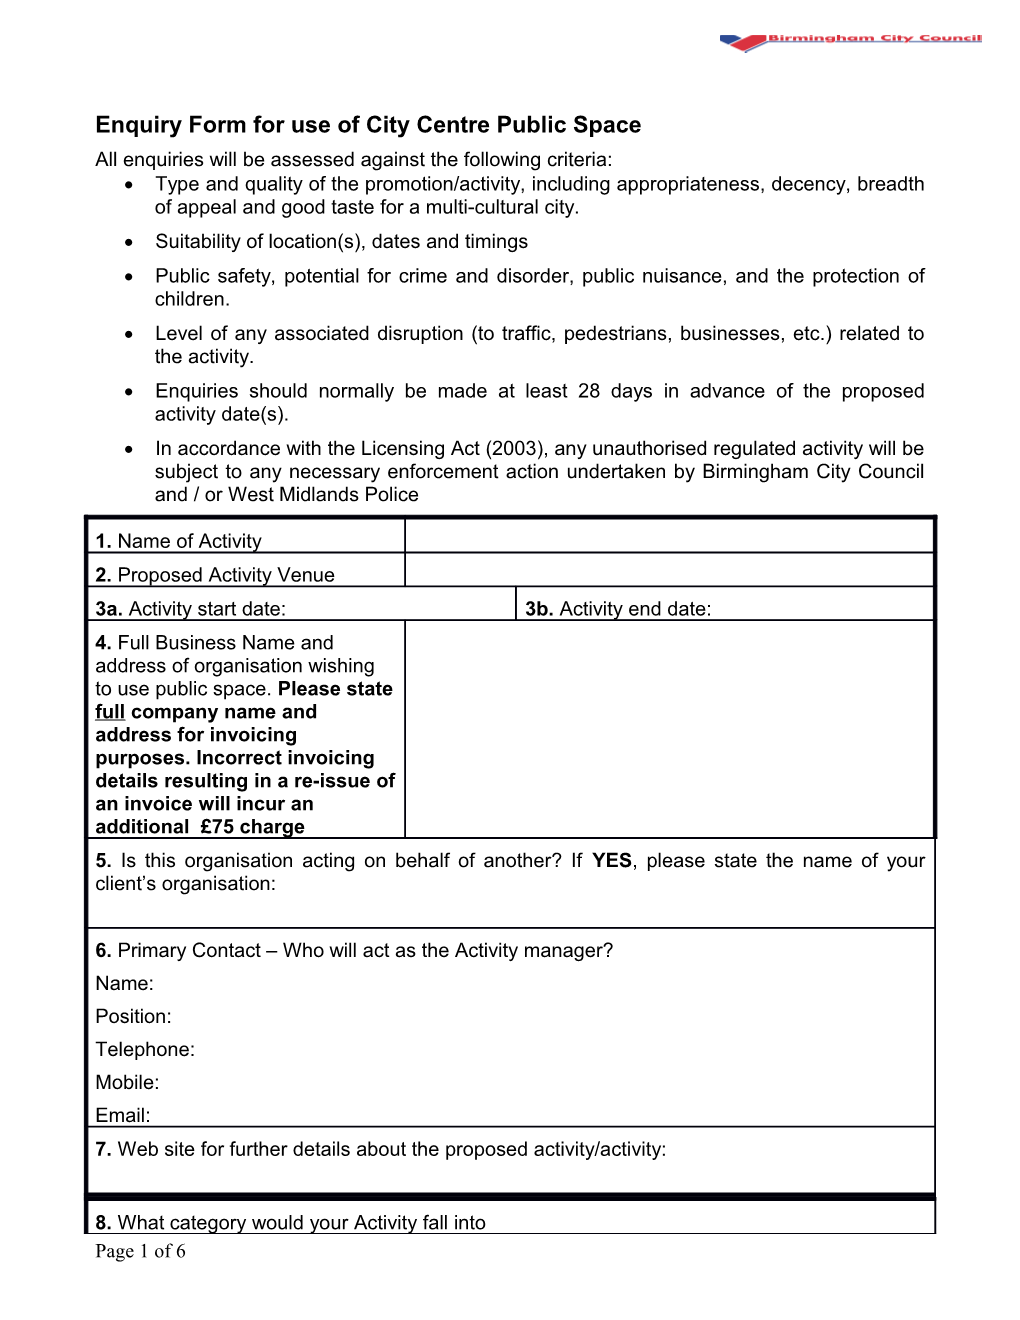 Enquiry Form for Use of City Centre Public Space